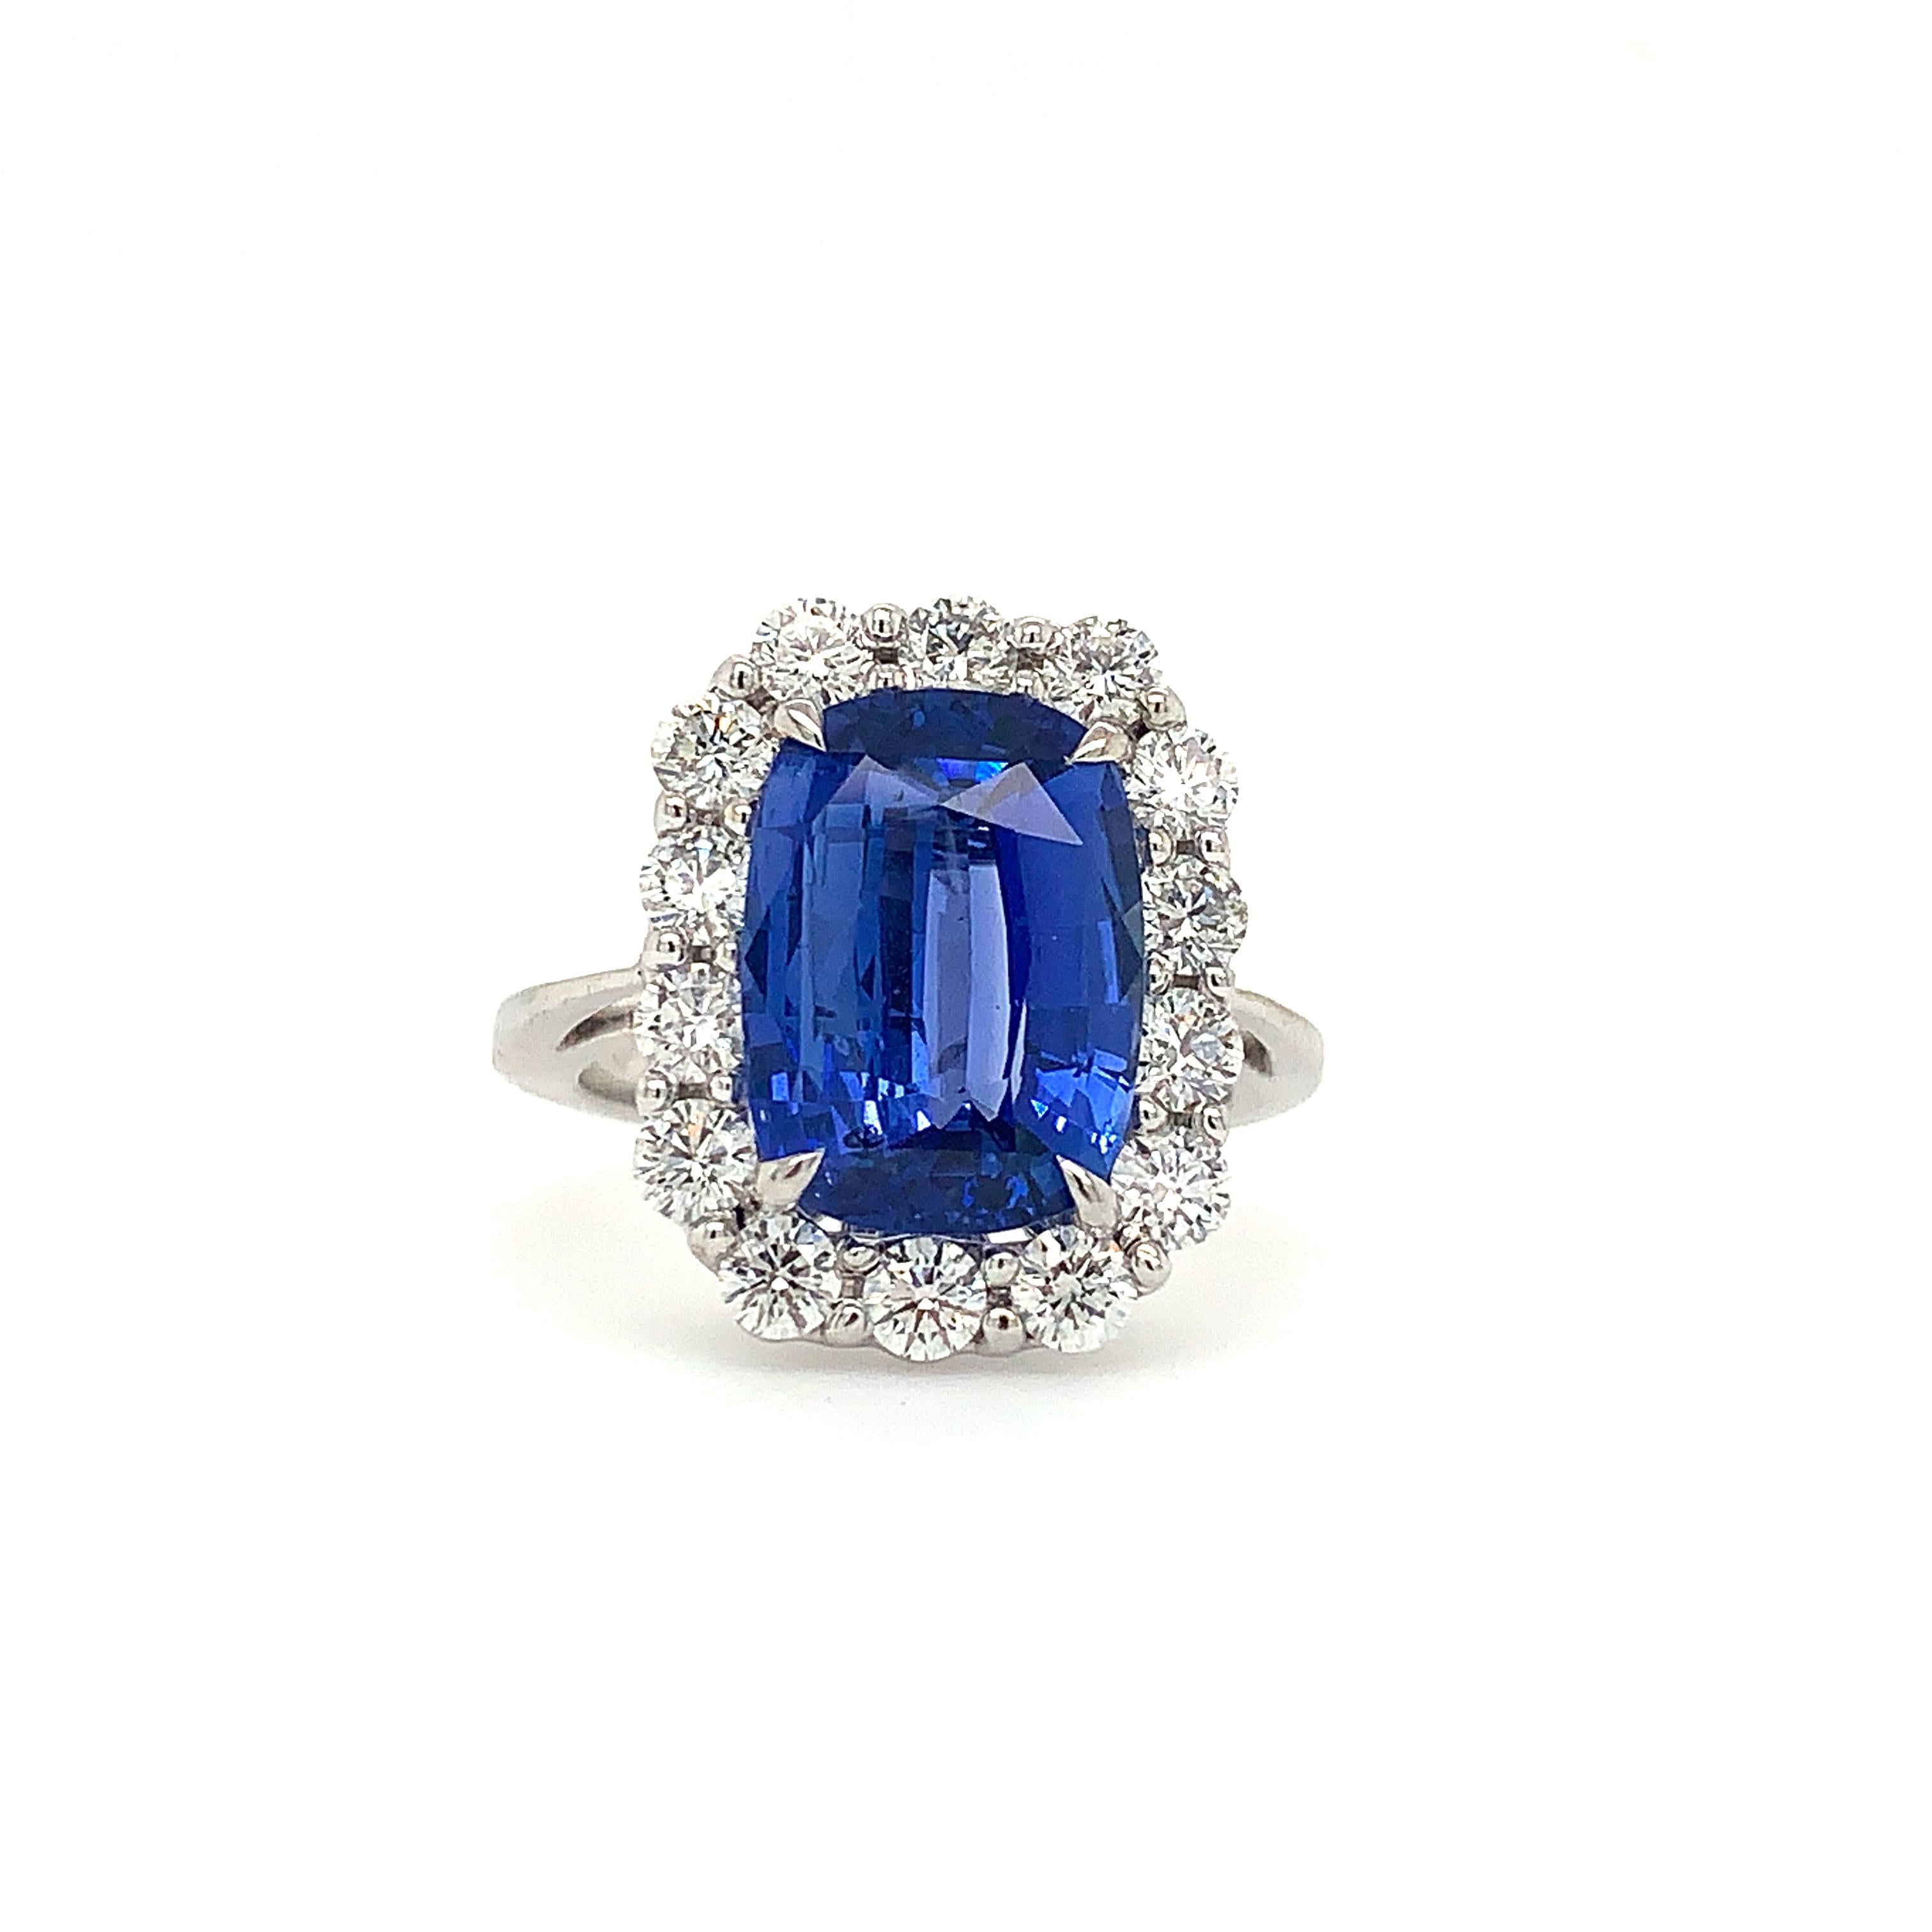 This one-of-a-kind ring features a natural, cushion-cut cornflower blue sapphire gemstone with a diamond halo in an 18K white gold setting. It weighs 6.3 grams and measures 17.5mmx13.4mm at the head, with a 2mm shank. Certified by CD Switzerland